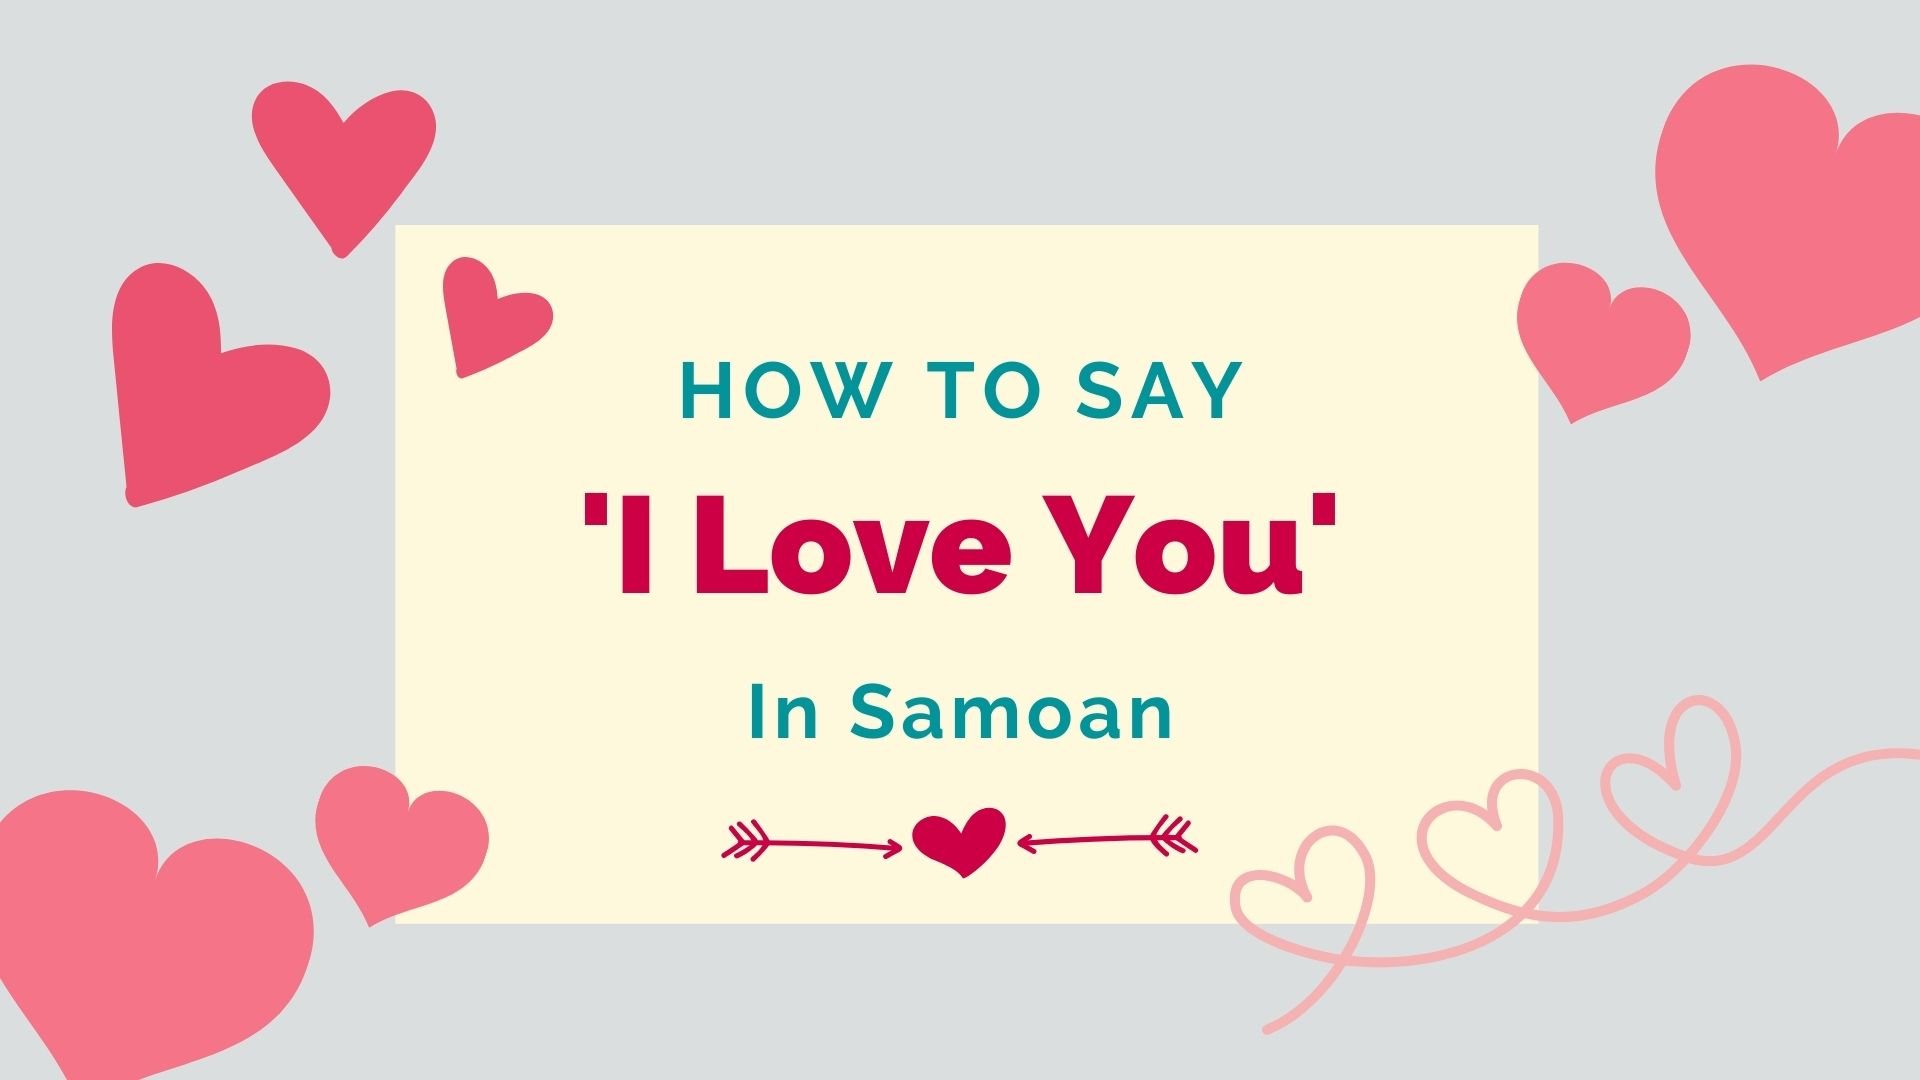 How To Say 'I Love You' In Samoan + Other Romantic Phrases - Lingalot